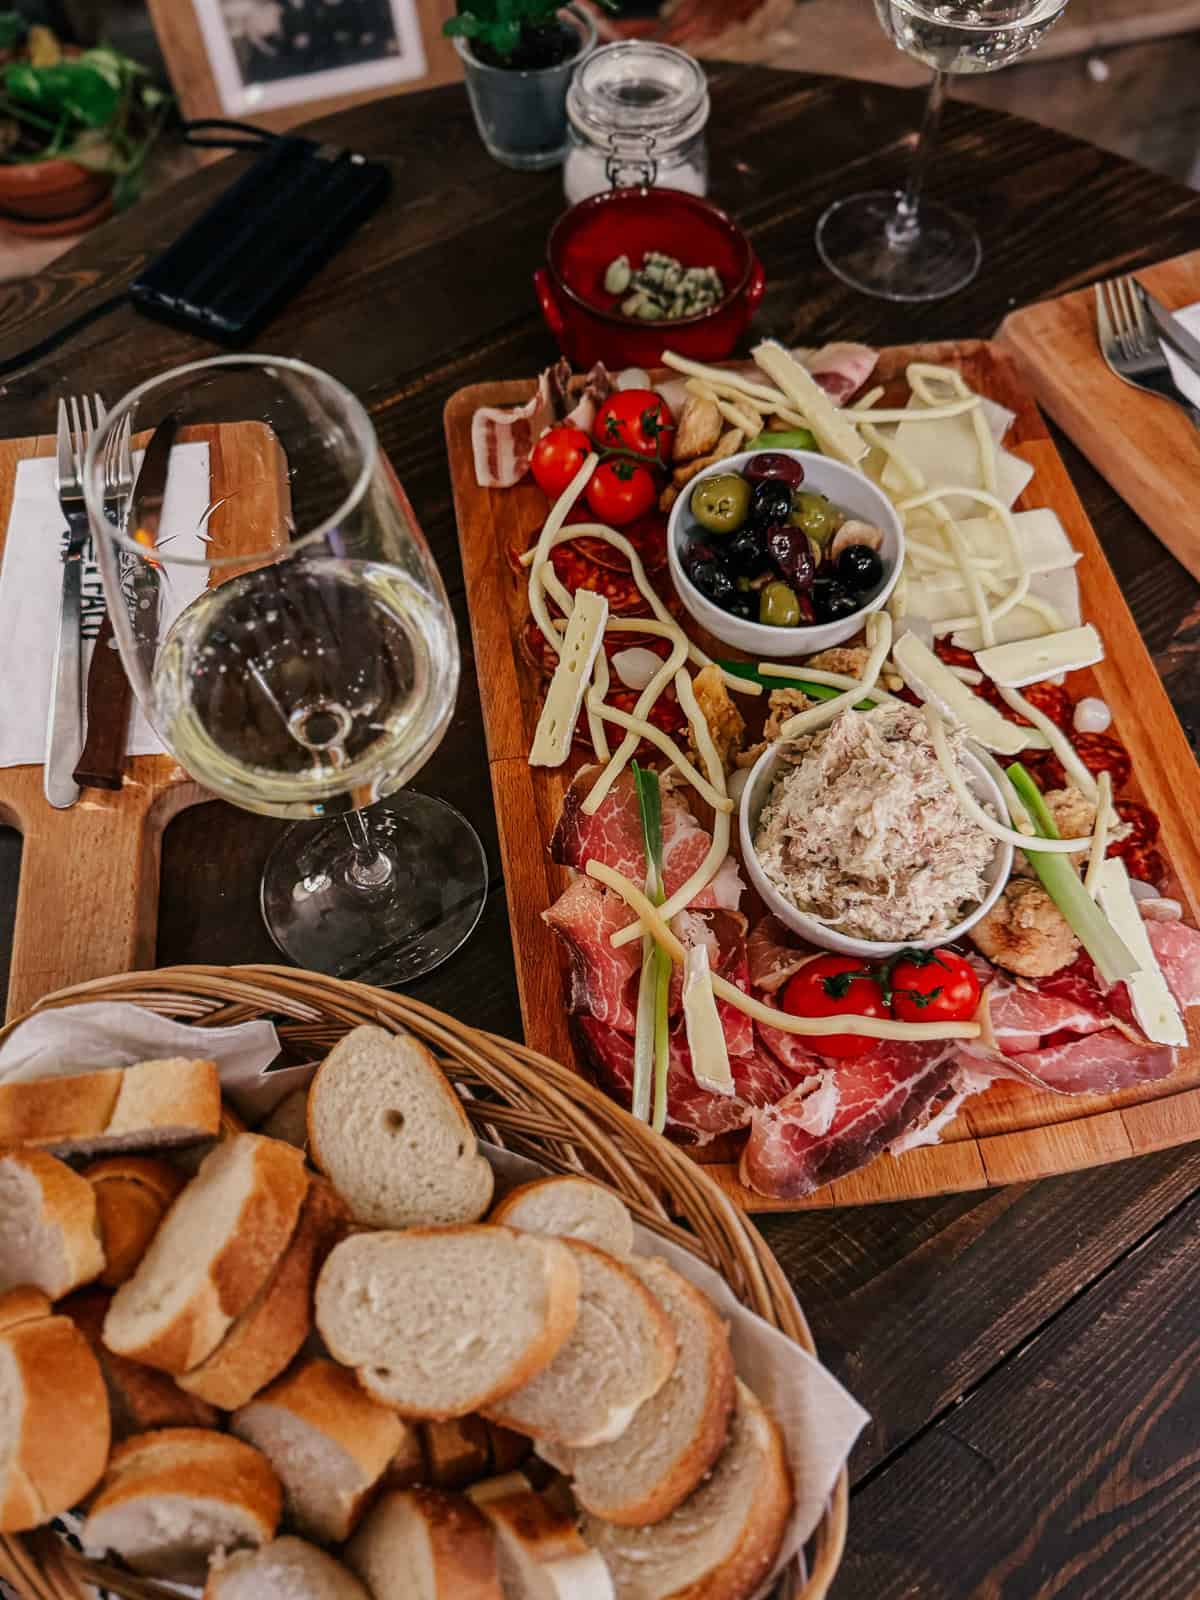 A charcuterie board with assorted meats, cheeses, olives, tomatoes, and bread, accompanied by glasses of white wine on a wooden table